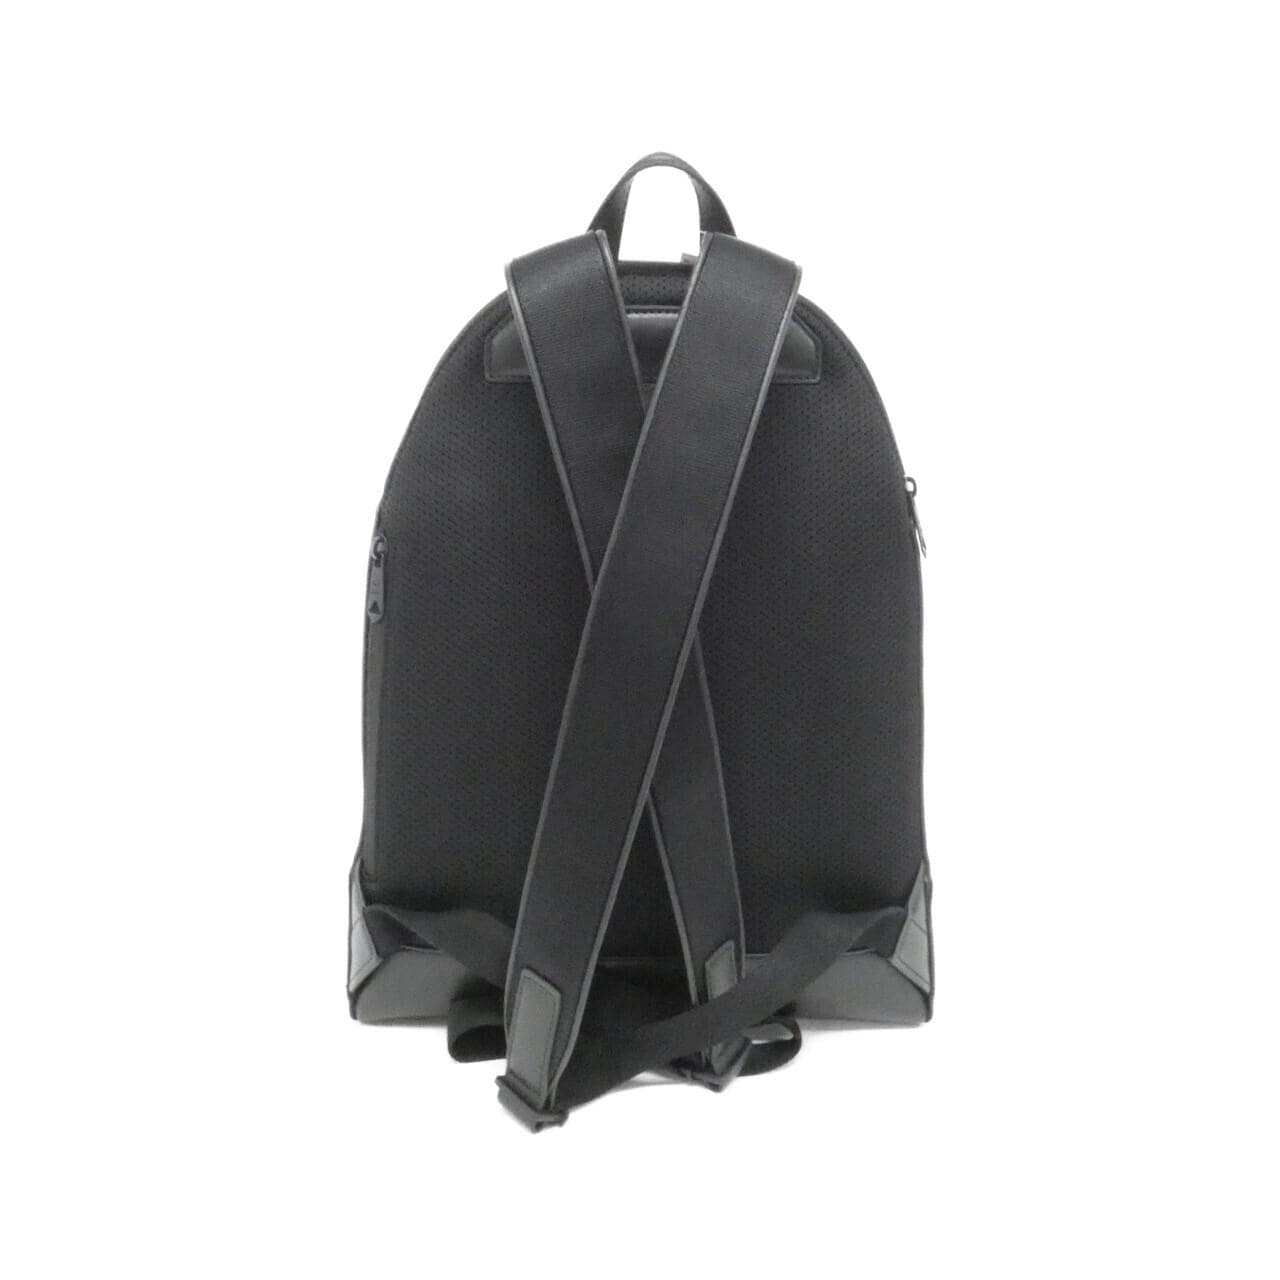 [BRAND NEW] Paul Smith 7646 Backpack